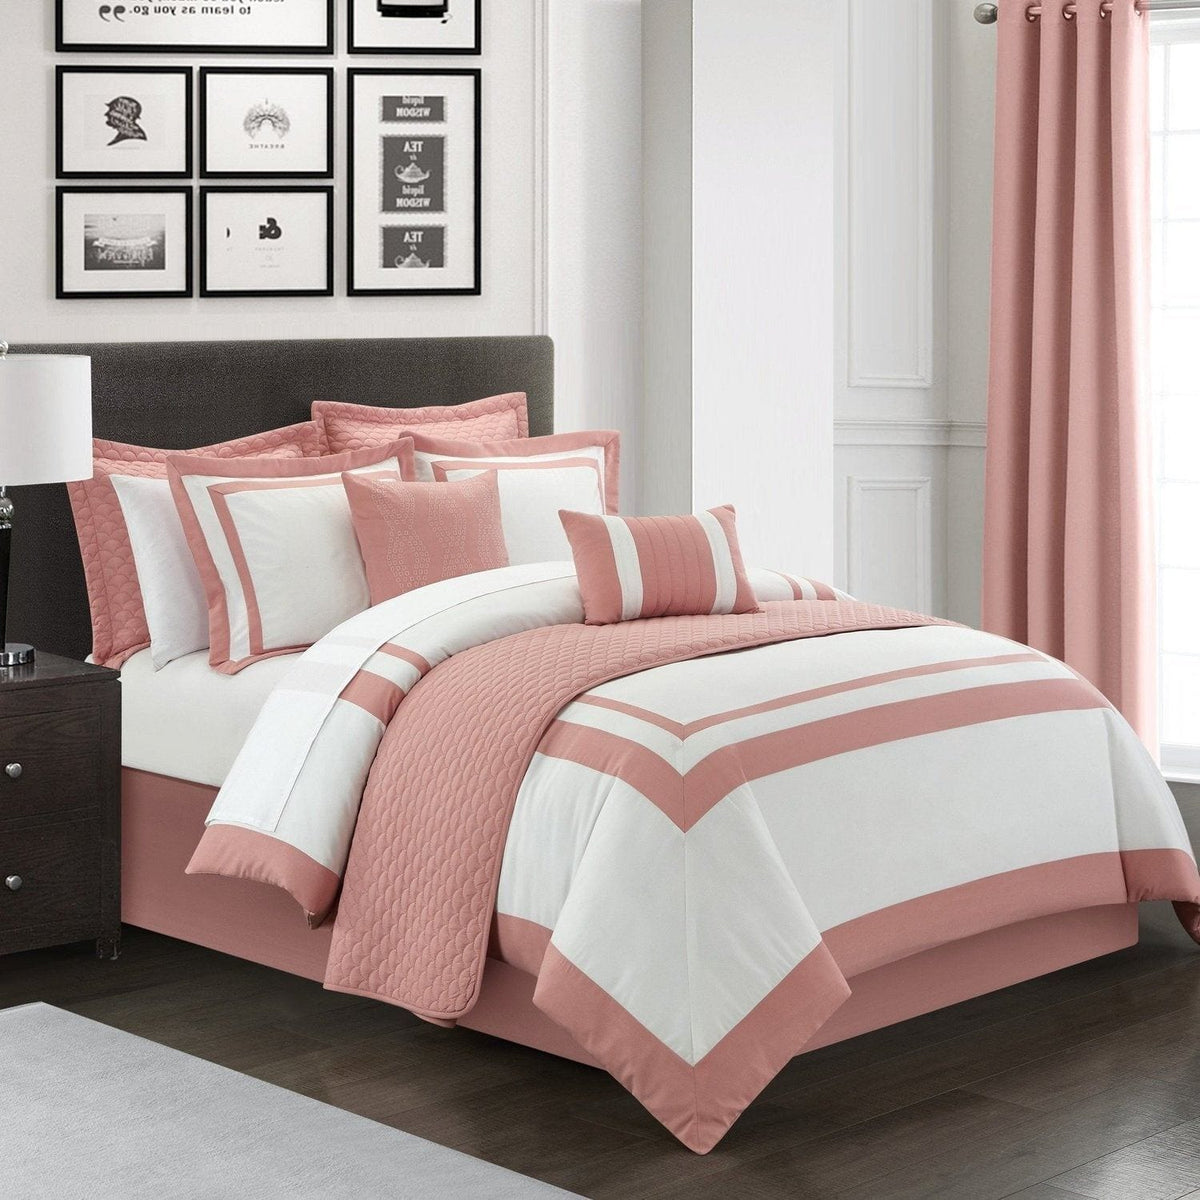 Chic Home Hortense 8 Piece Comforter And Quilt Set 